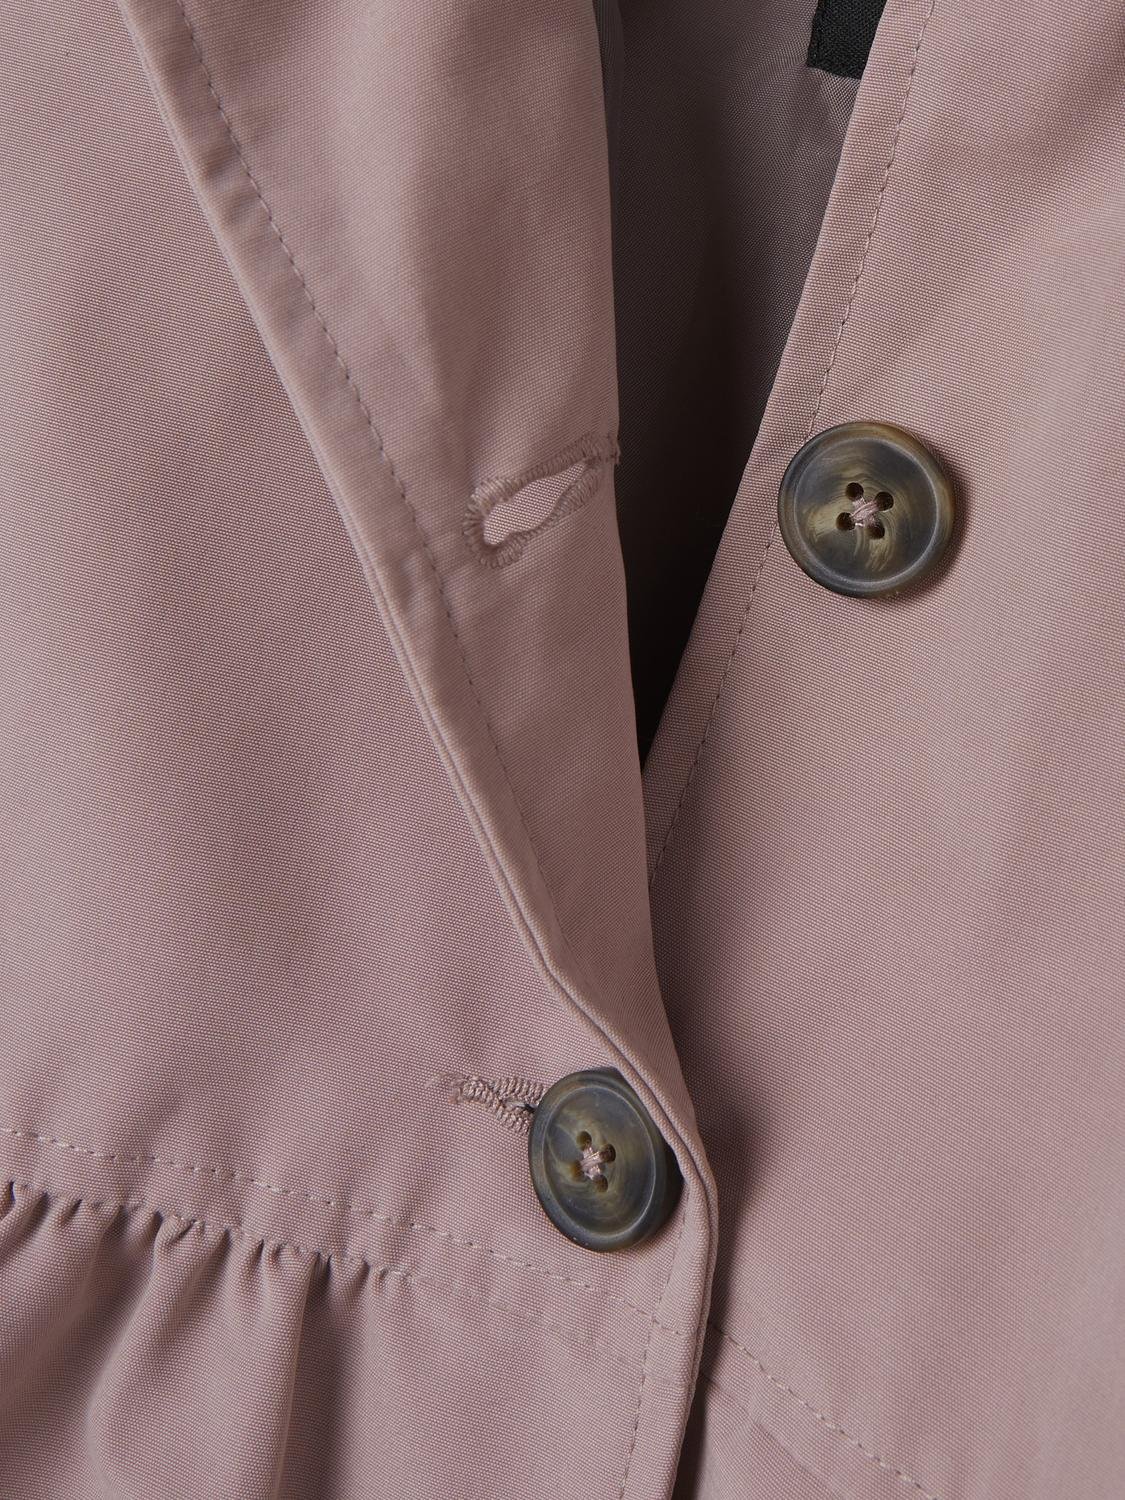 NMFMADELIN Outerwear - Deauville Mauve